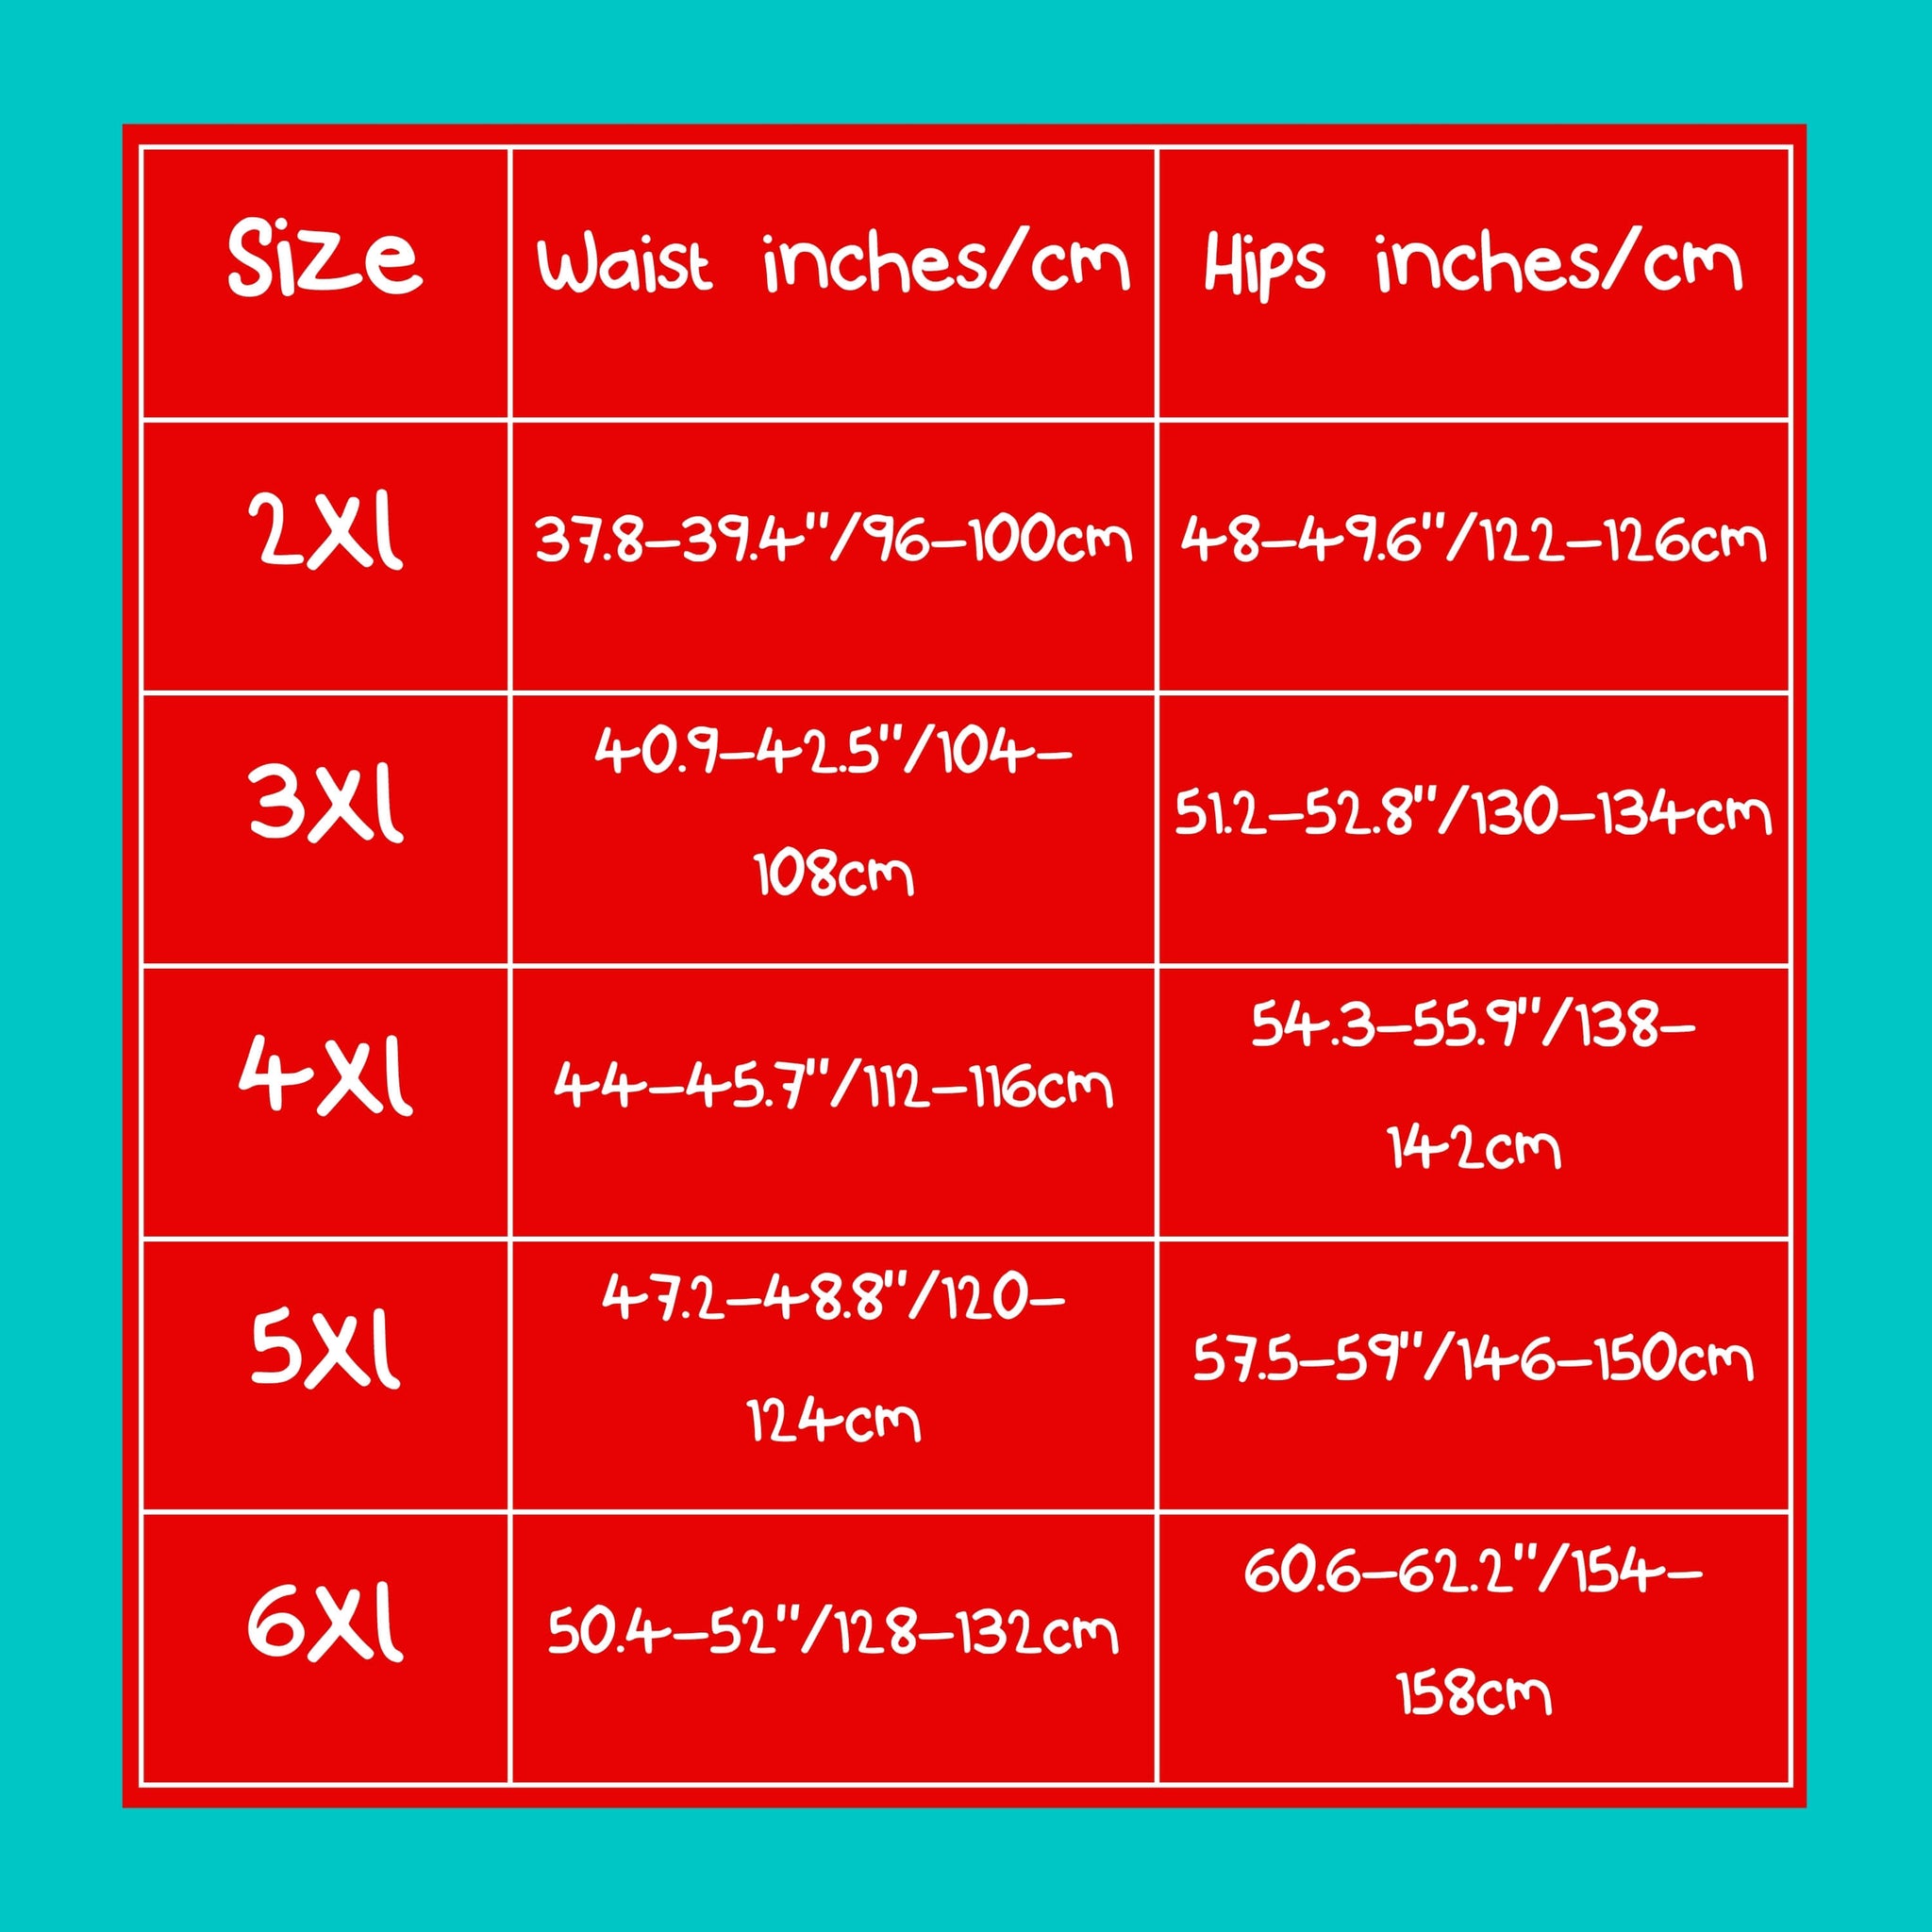 Size guide size chart of the measurements in centimetres and inches of the spoonie plus size leggings from innabox in red, blue and white.